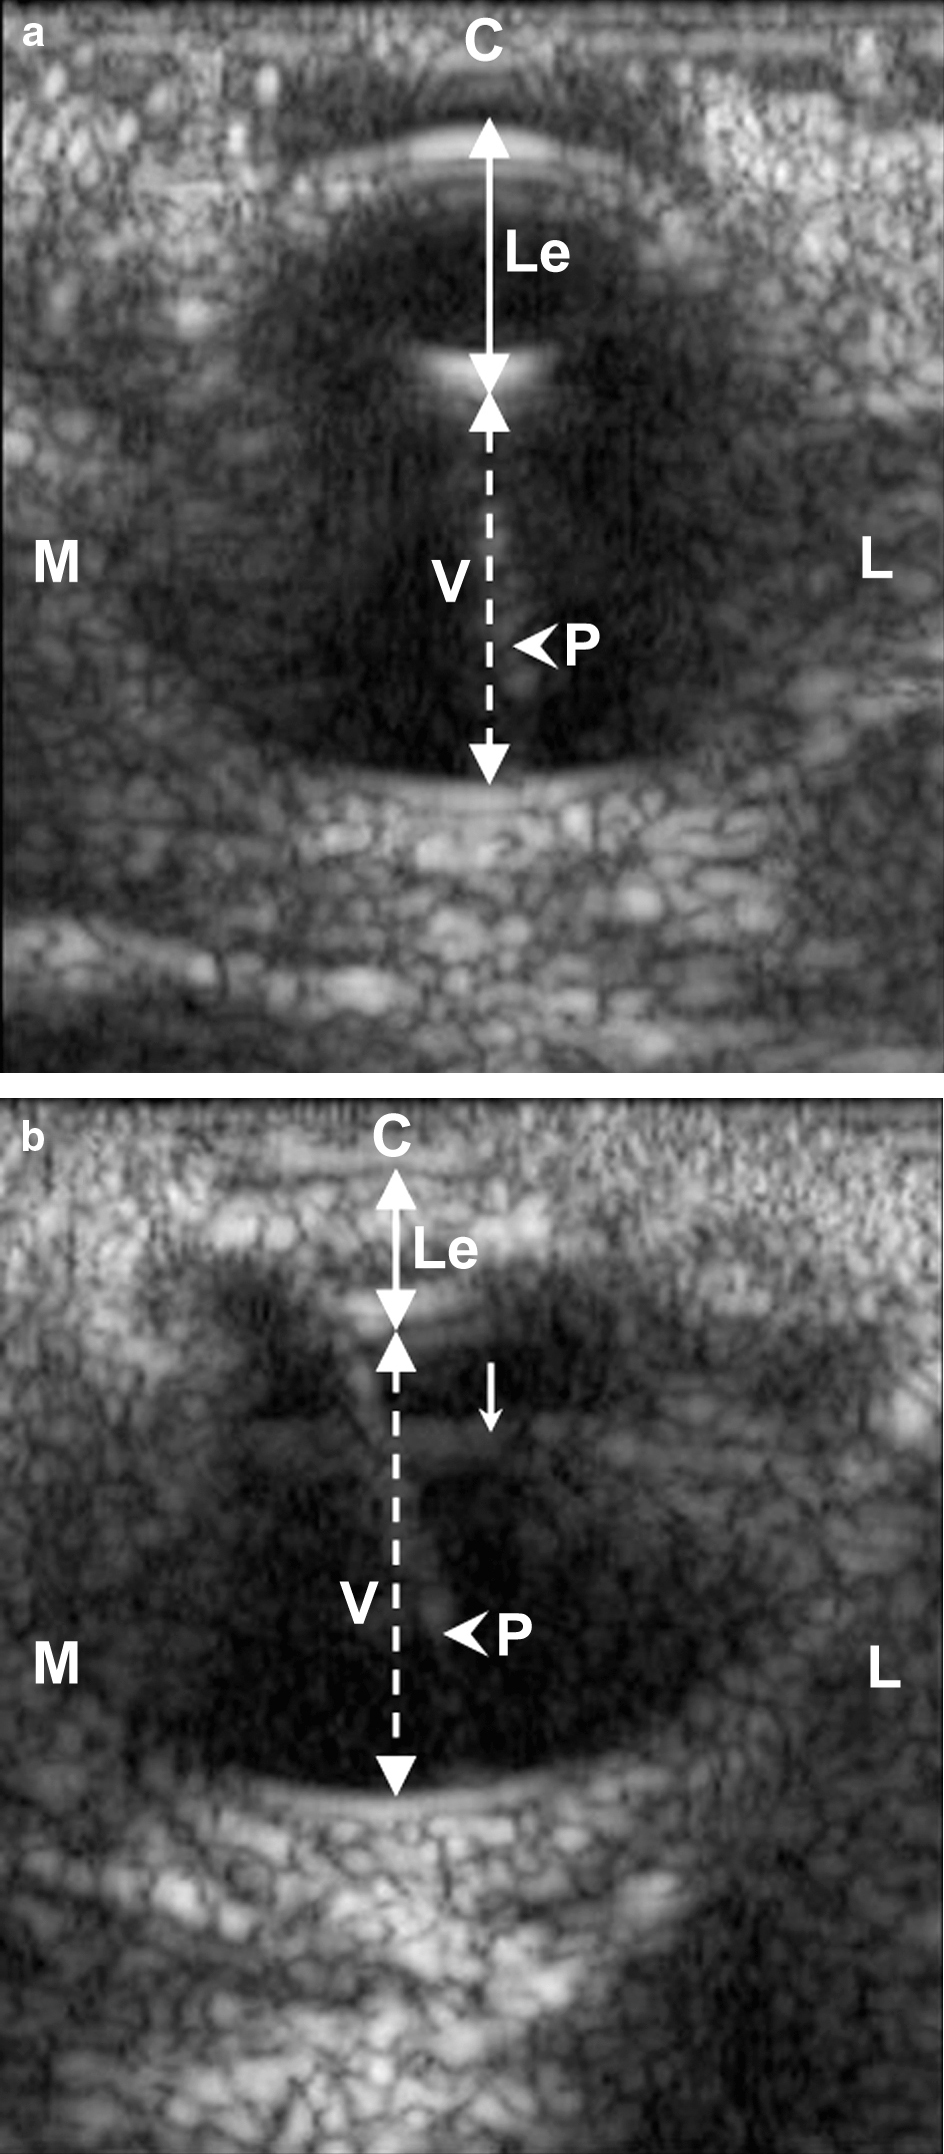 Figure 1.  Ultrasonographic photography of the eye of a 3-week-old affected animal (1b) and its control (1a). In the affected animal, an abnormal hyperechogenicity in the lens cortex and a microphakia are detectable when compared with the control. C, cornea. Le, lens; V, vitreous, Continuous doubleheaded arrow, antero-posterior axis of the lens; discontinuous doubleheaded arrow, antero-posterior axis of the vitreous; arrowhead, with pecten (P); thin arrow, probe-related artefact. M, medial; L, lateral. B-scan/10 MHz.